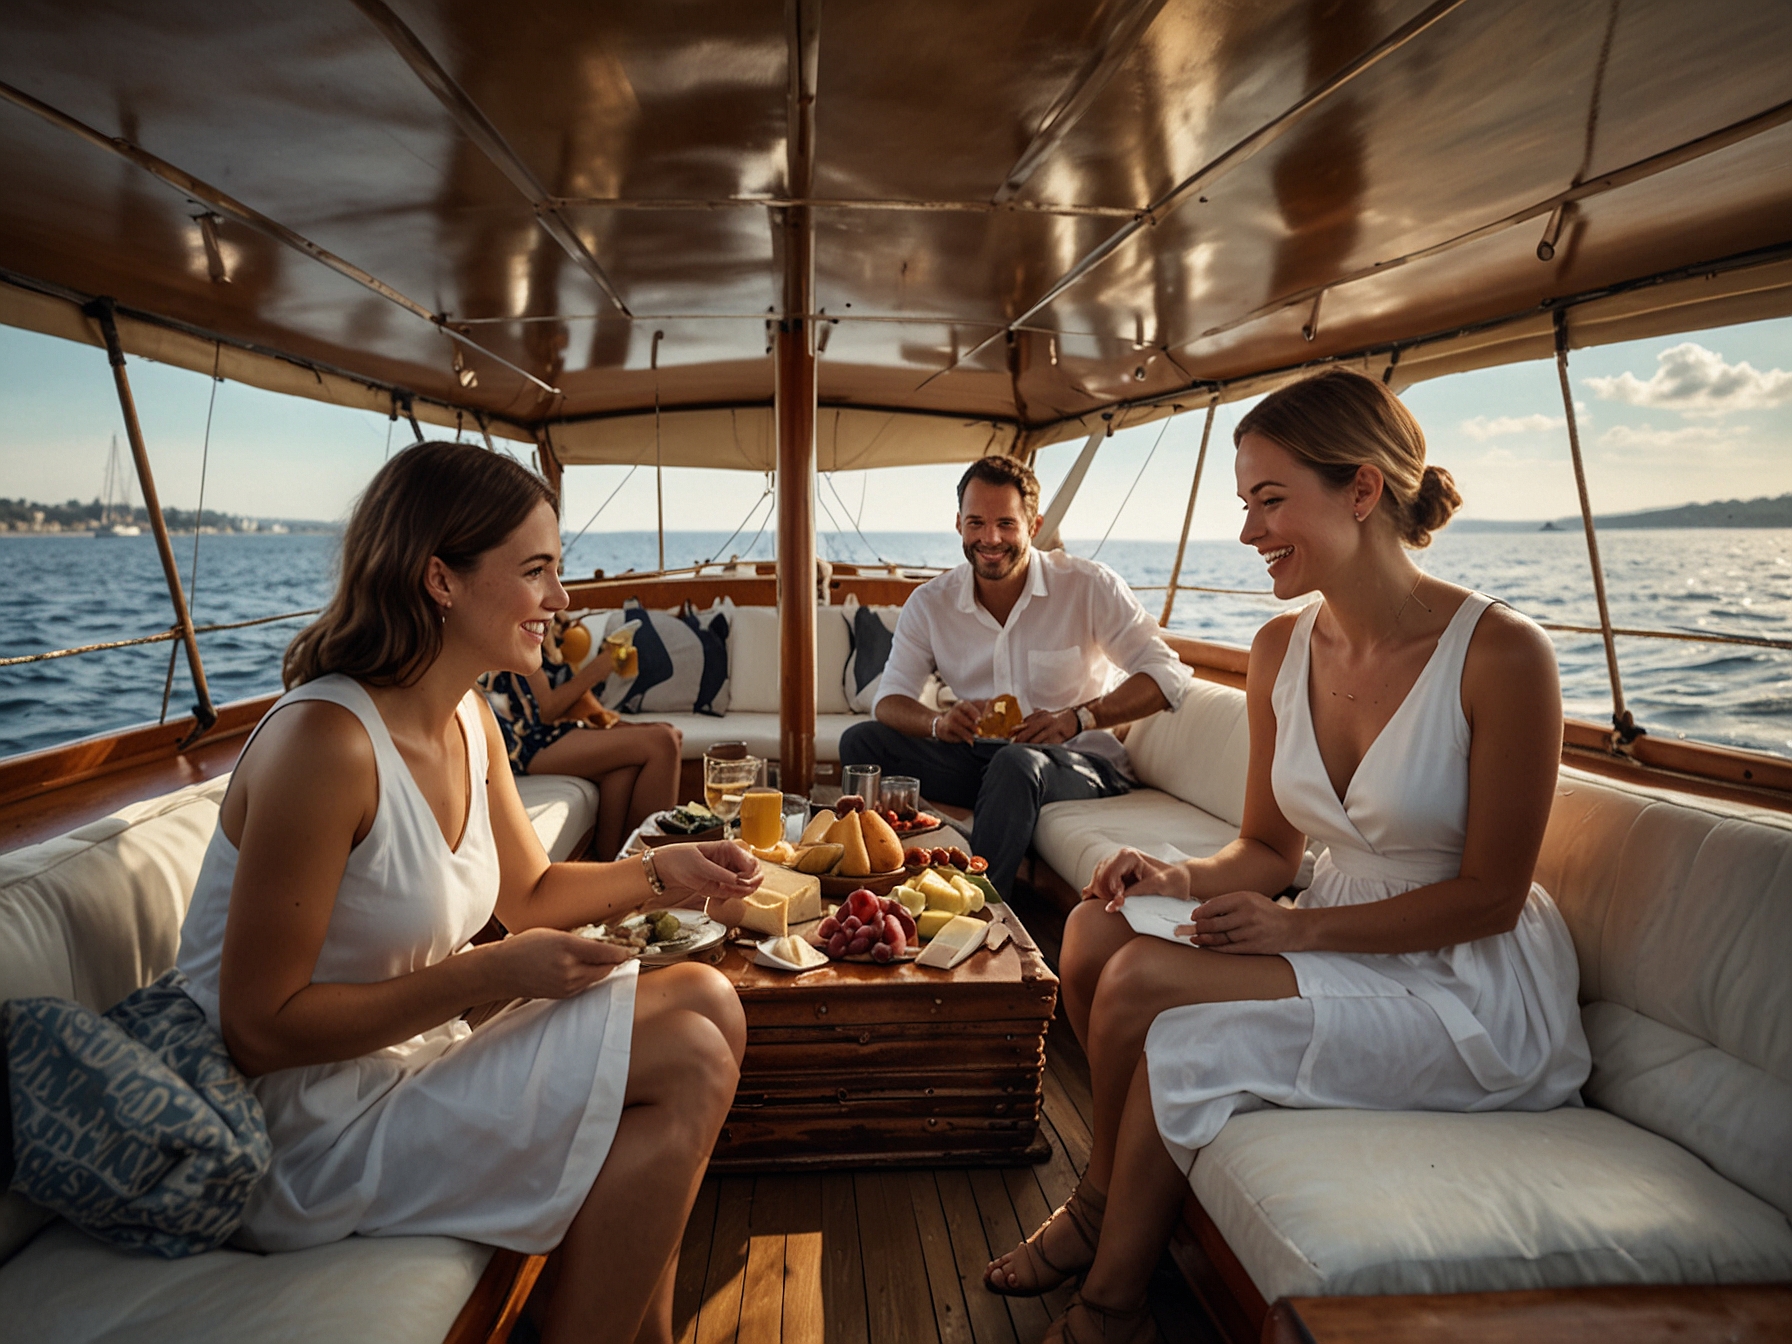 Passengers enjoy a gourmet picnic with artisanal cheeses, charcuterie, and champagne on the deck of a beautifully restored antique sailboat, emphasizing the refined dining and opulent ambiance.